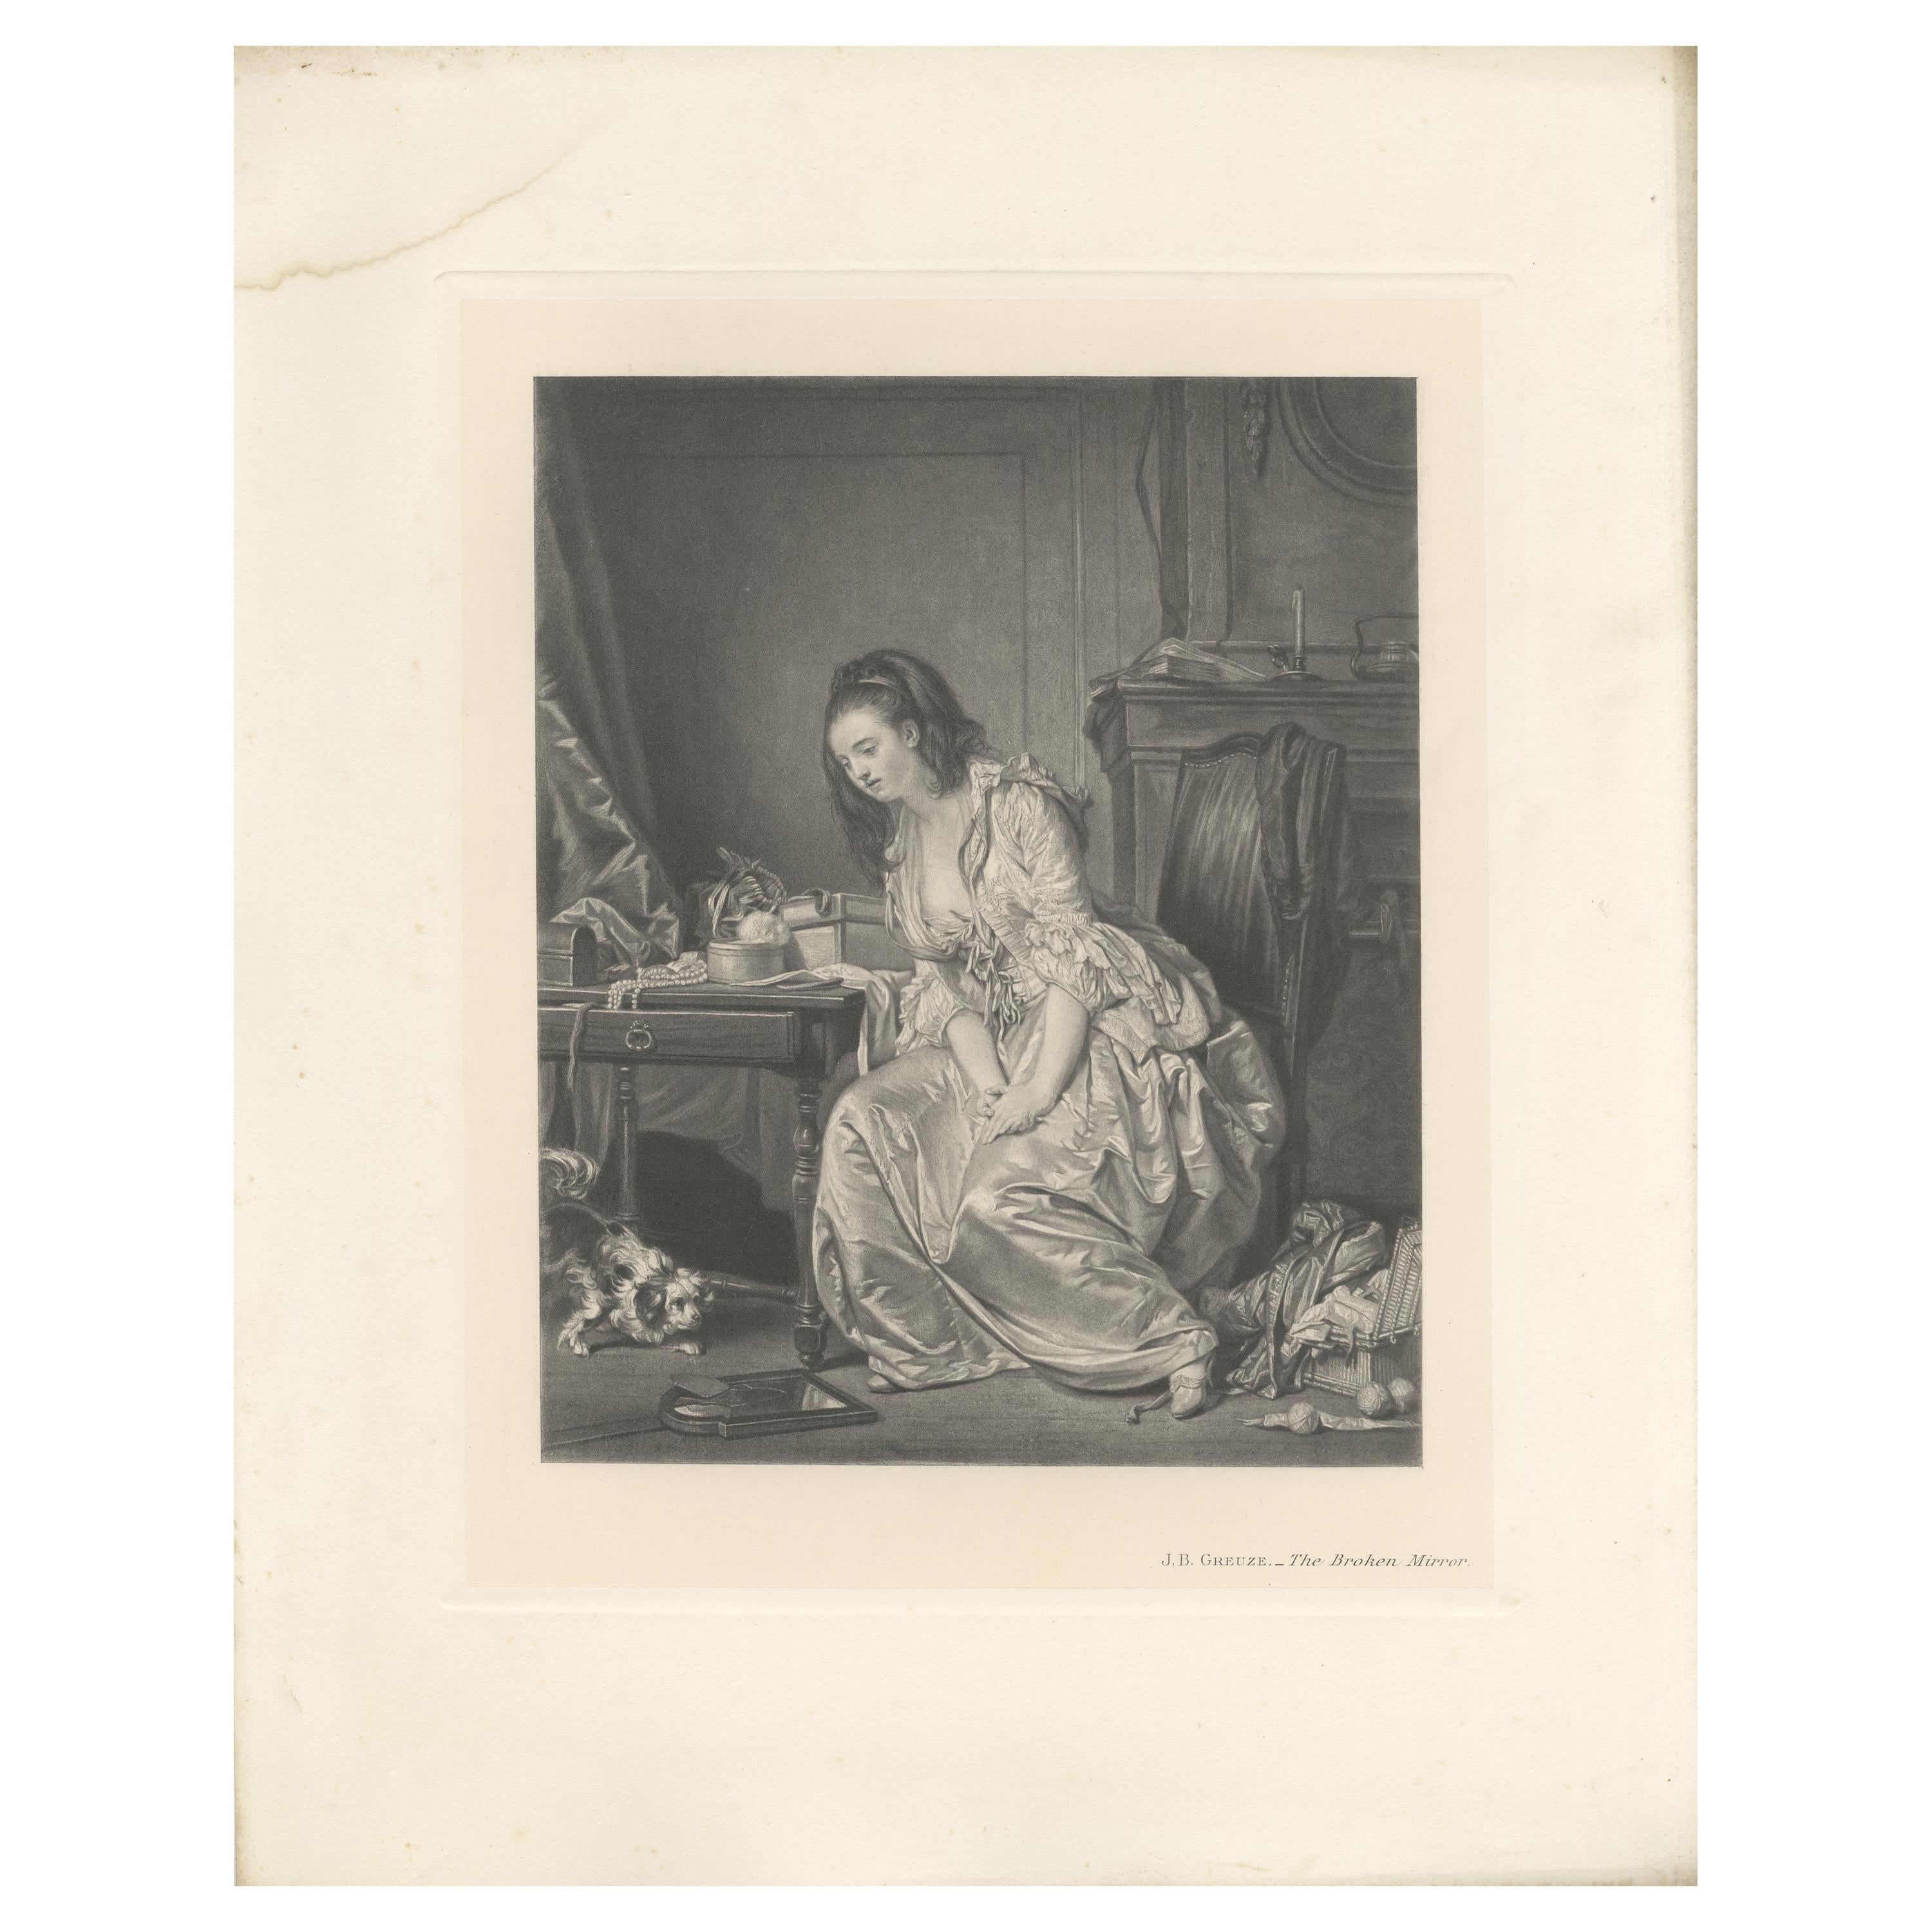 Antique Print of 'The Broken Mirror' made after J.B. Greuze (1902) For Sale